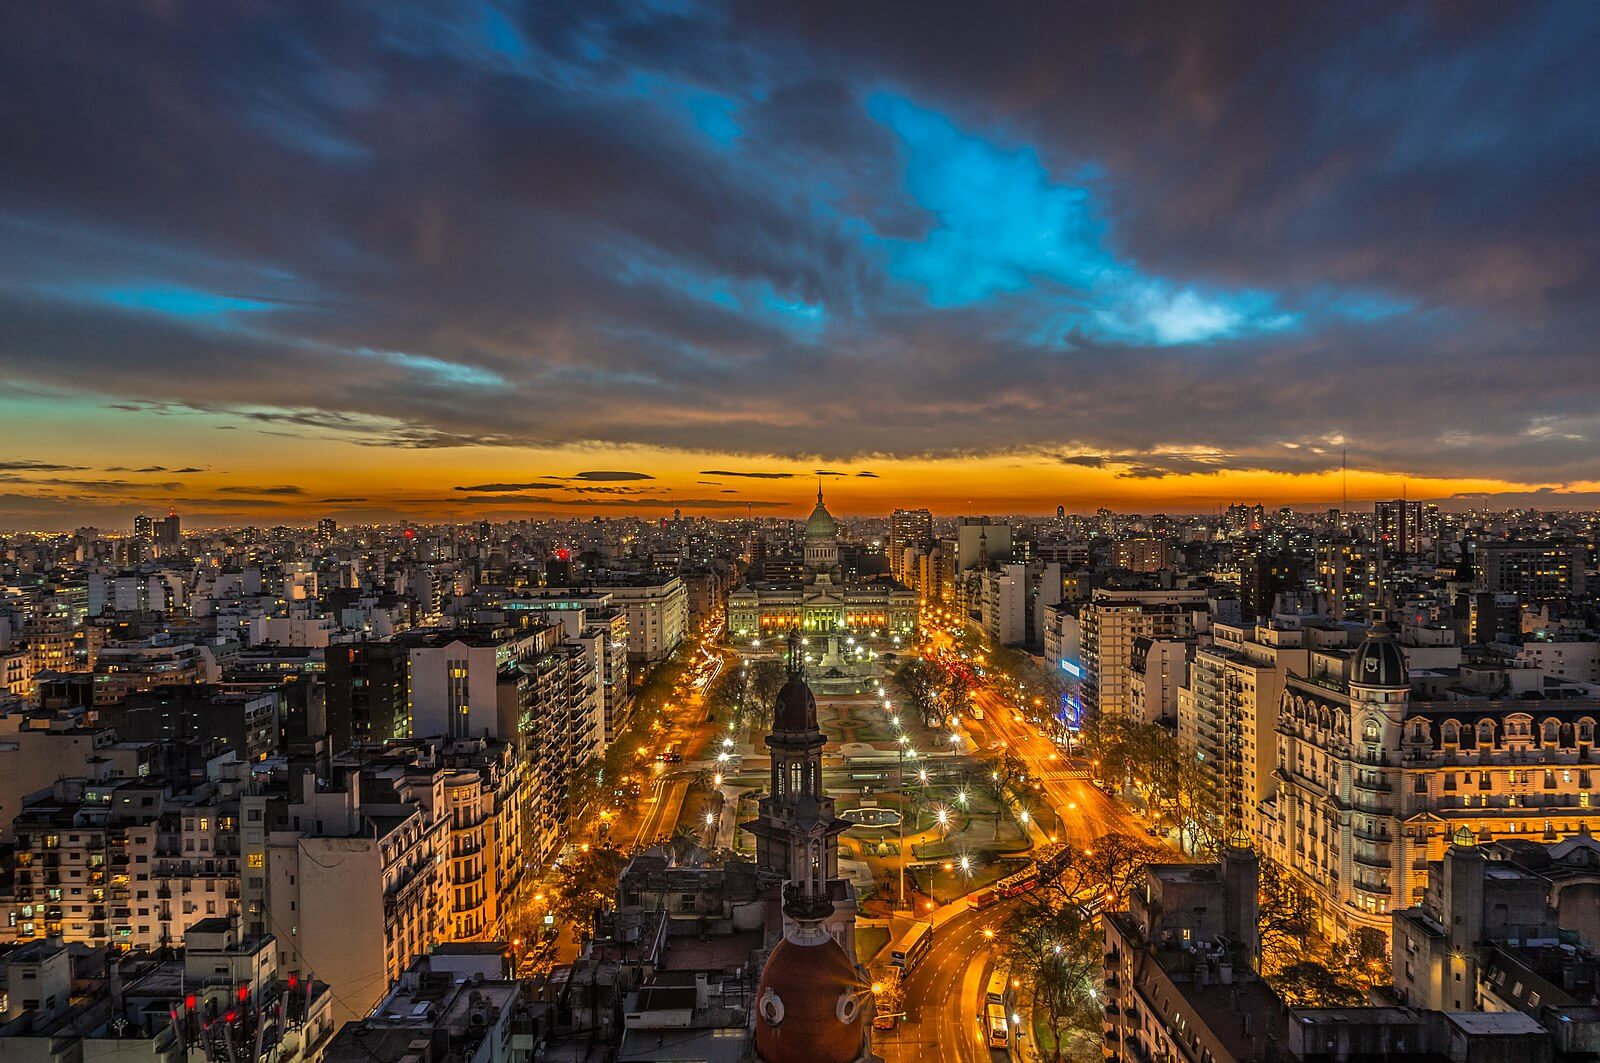 Is Argentina’s time zone the correct one? Some lawmakers think it’s time to change it